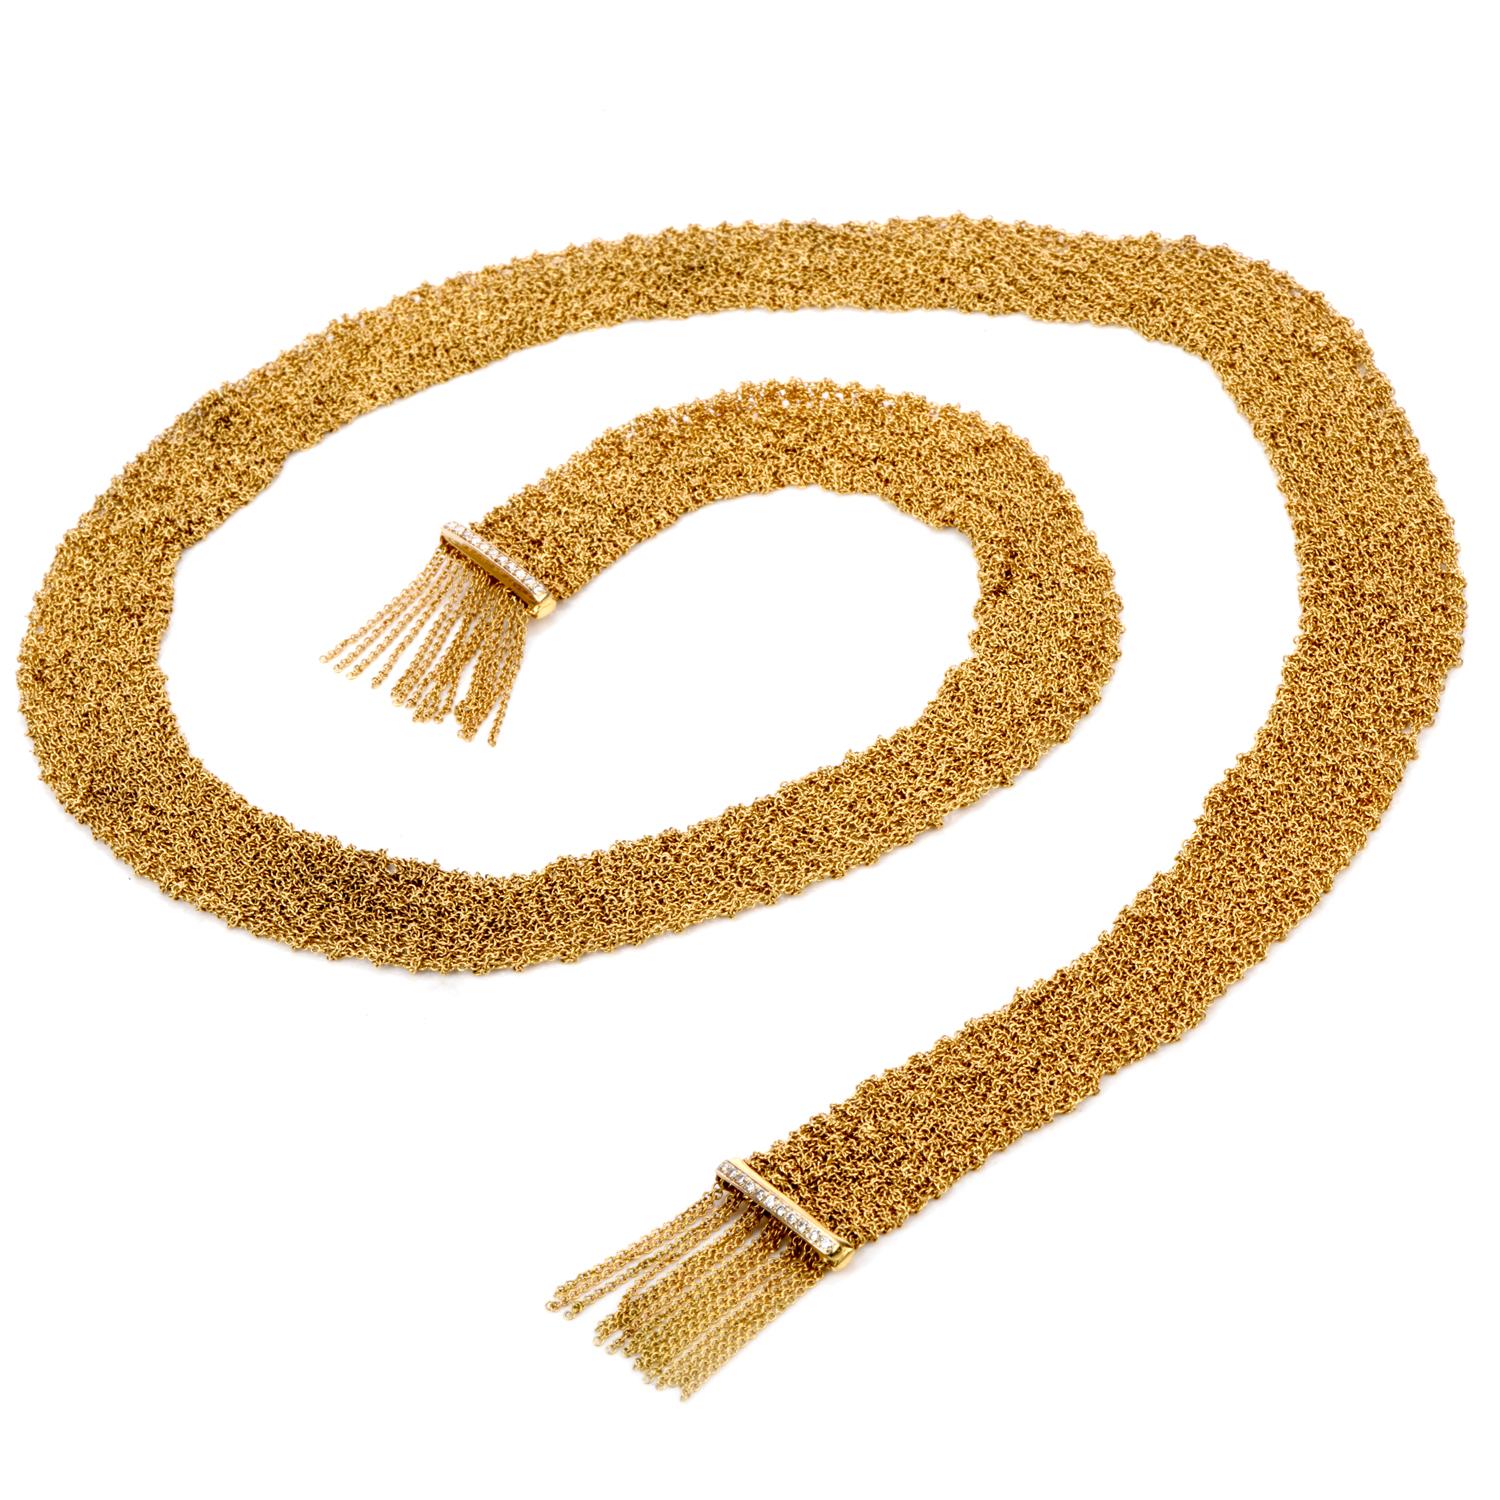 This Estate Necklace was inspired with a Scarf Style mesh Necklace Wrap around neck

motif and crafted in 18K. This long mesh chains run the full 27 inches of length and width of 19mm.

 Adorning each end is a Gold bar containing 11 round diamonds. 